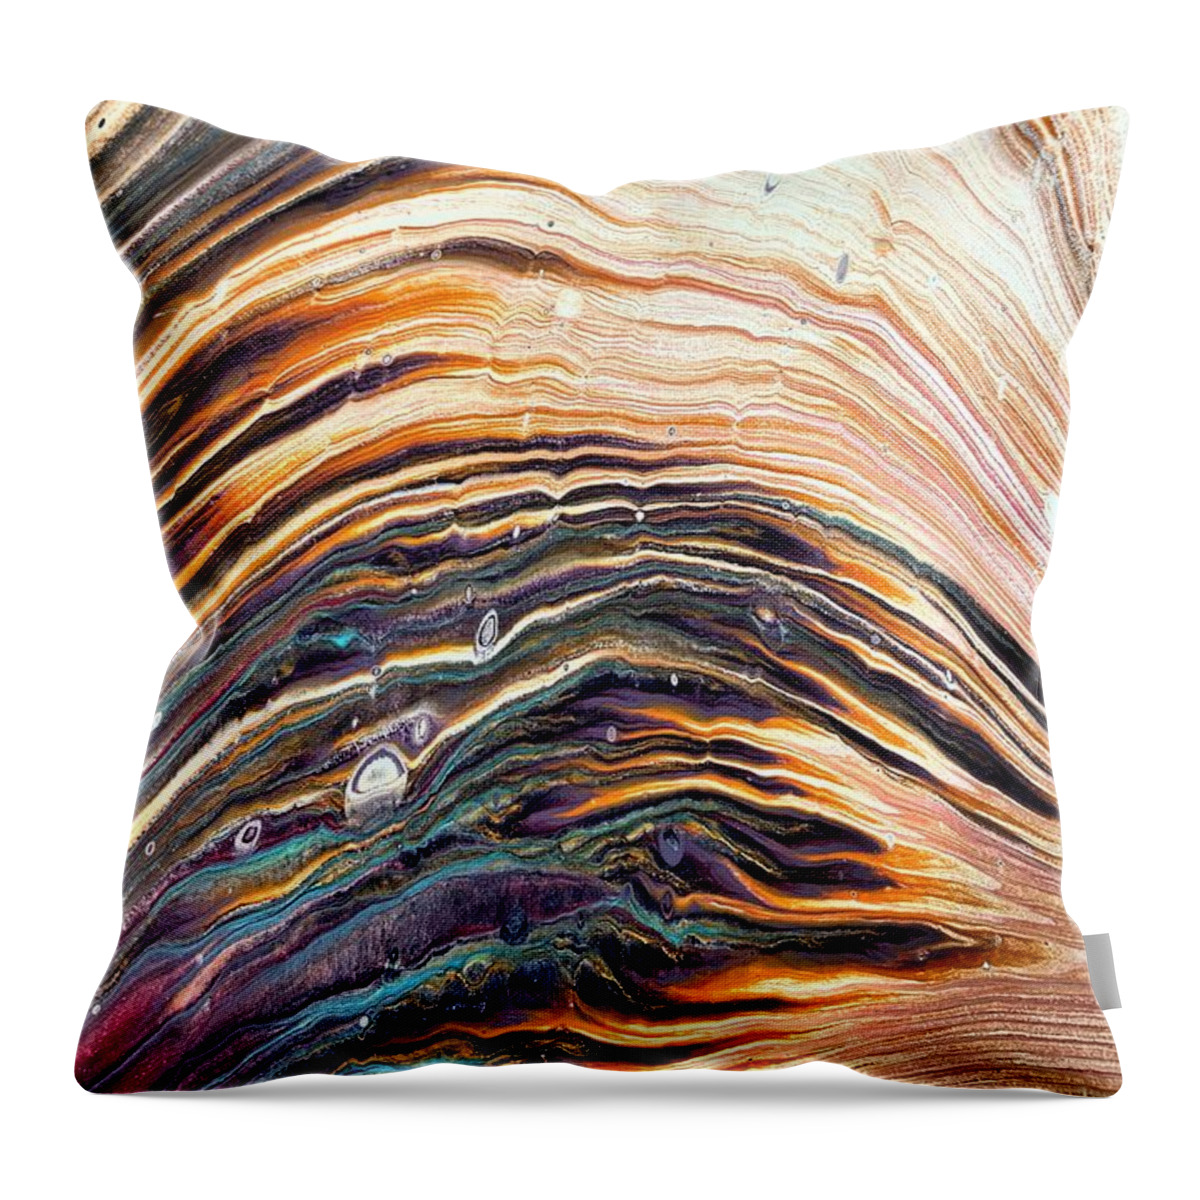 Abstract Throw Pillow featuring the painting Layers by Soraya Silvestri